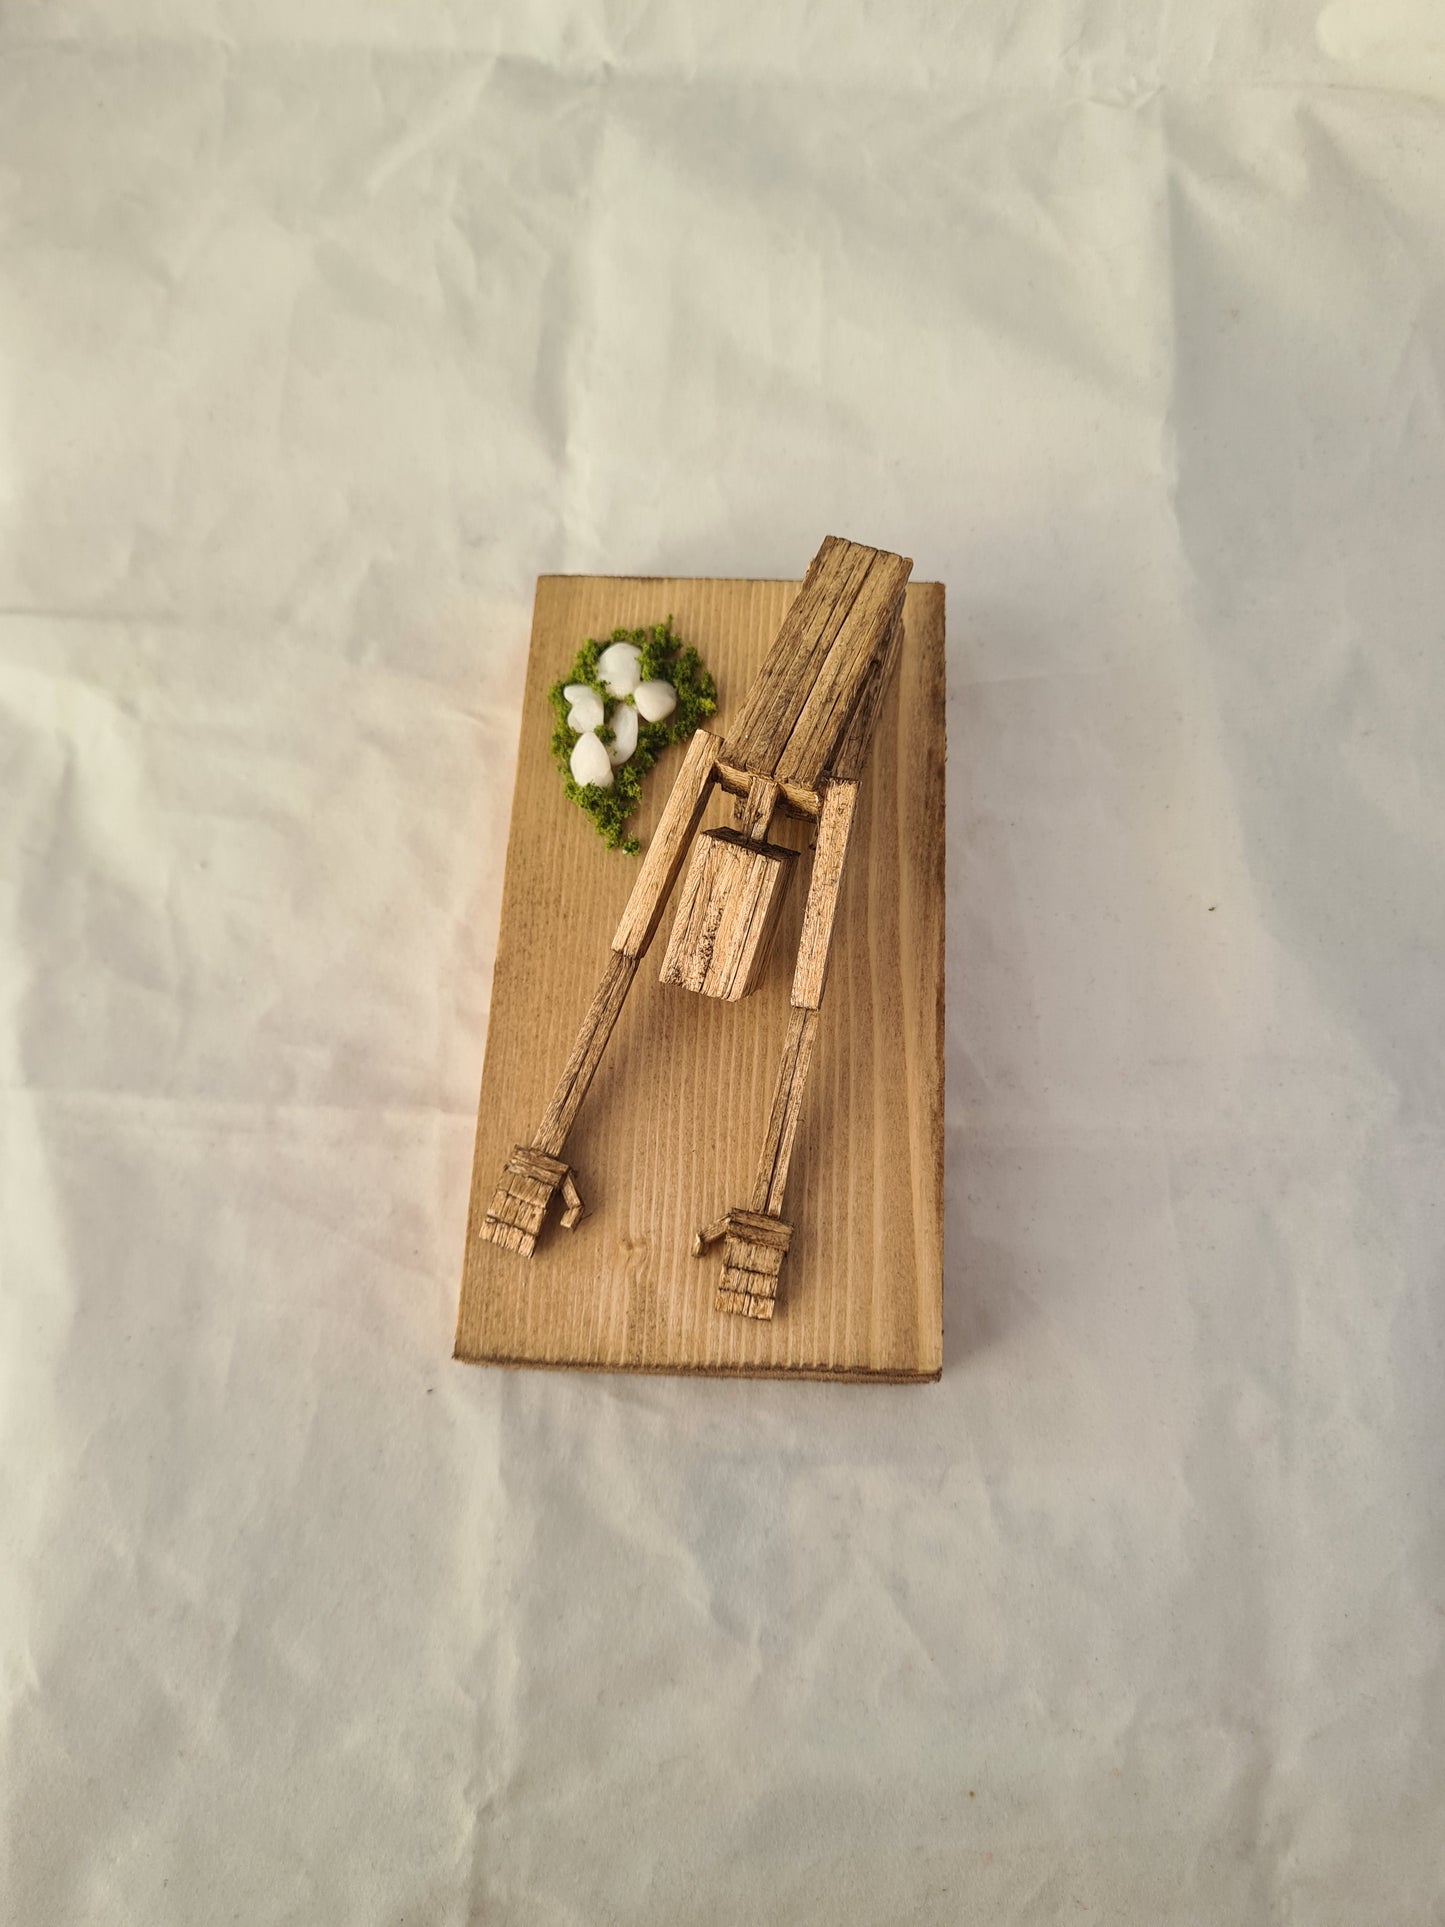 Childs Pose - Handcrafted Wooden Matchstick Figures - Gifts, Ornaments and Decor By Tiggidy Designs